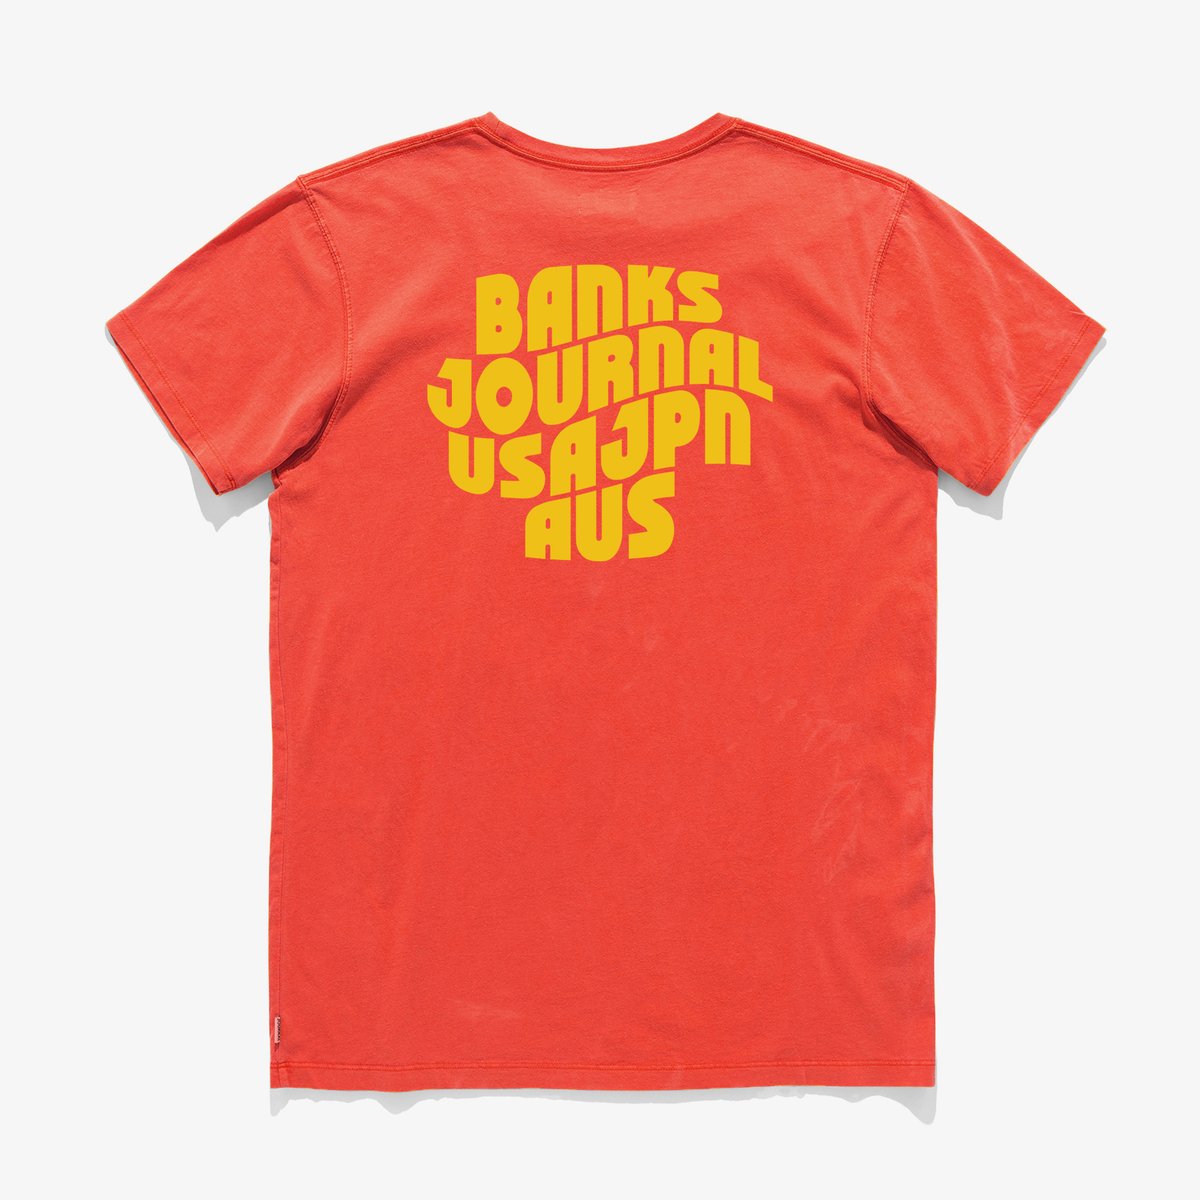 Posted Classic Tee Shirt